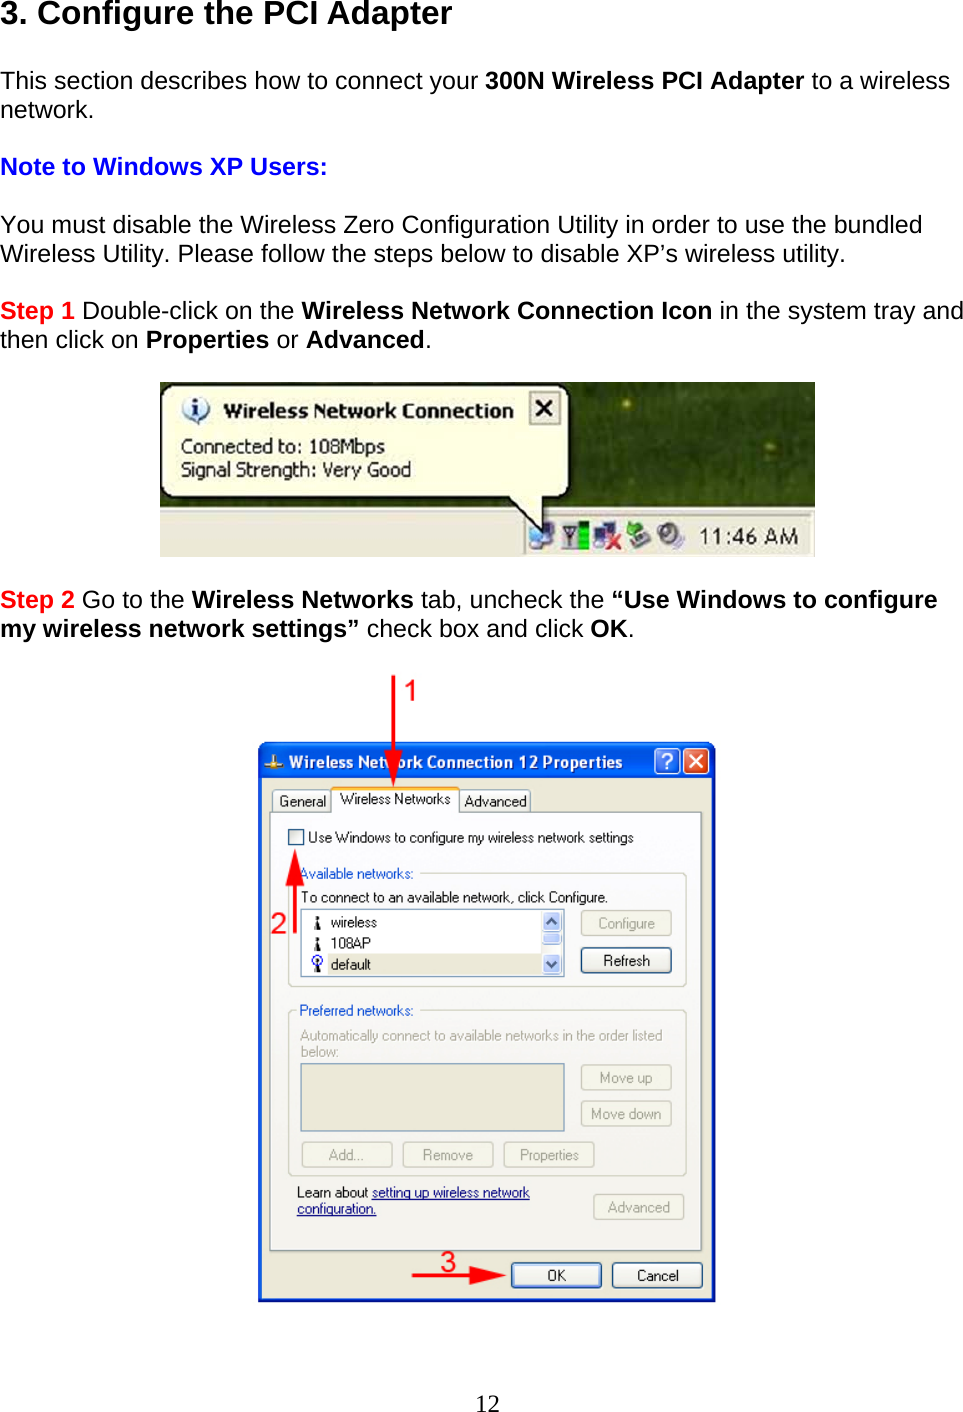 12 3. Configure the PCI Adapter  This section describes how to connect your 300N Wireless PCI Adapter to a wireless network.  Note to Windows XP Users:  You must disable the Wireless Zero Configuration Utility in order to use the bundled Wireless Utility. Please follow the steps below to disable XP’s wireless utility.  Step 1 Double-click on the Wireless Network Connection Icon in the system tray and then click on Properties or Advanced.    Step 2 Go to the Wireless Networks tab, uncheck the “Use Windows to configure my wireless network settings” check box and click OK.    